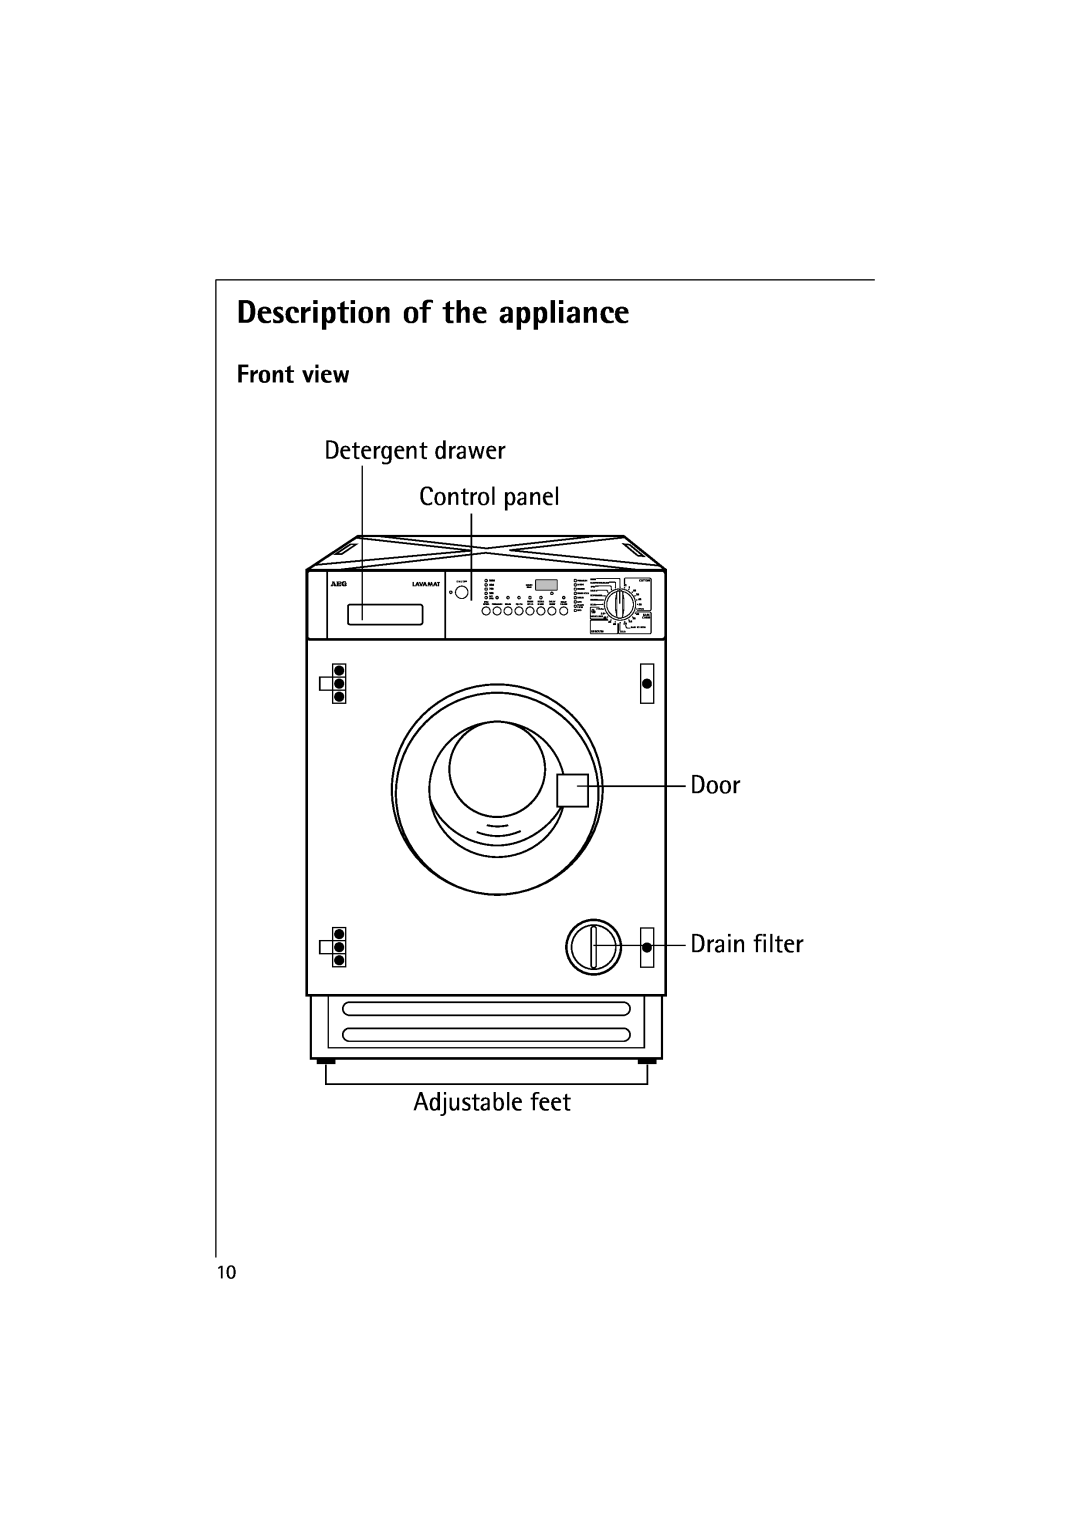 Electrolux 10500 VI manual Description of the appliance, Front view, Detergent drawer Control panel, Door, Adjustable feet 